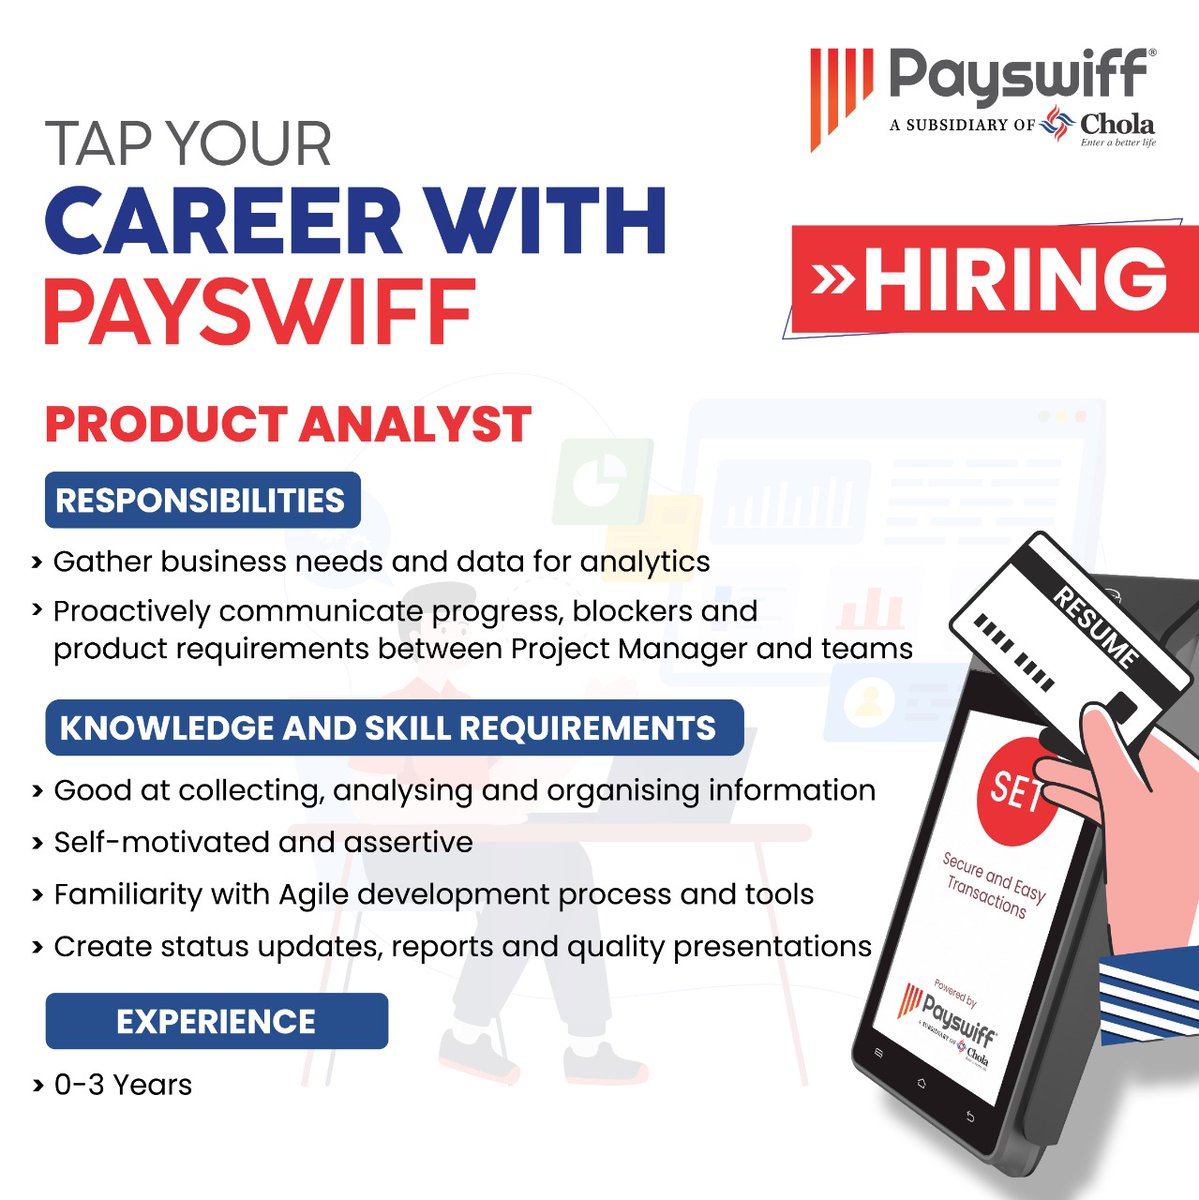 We are looking for an enthusiastic Product Analyst to join us. People with relevant experience & skills mail us on: hr@payswiff.com
#joinpayswiff #product #hiringproductanalyst #productanalyst #fintech #digitalpayments #fintechjob #jobsforyou #hiring #payswiffindia #recruitment